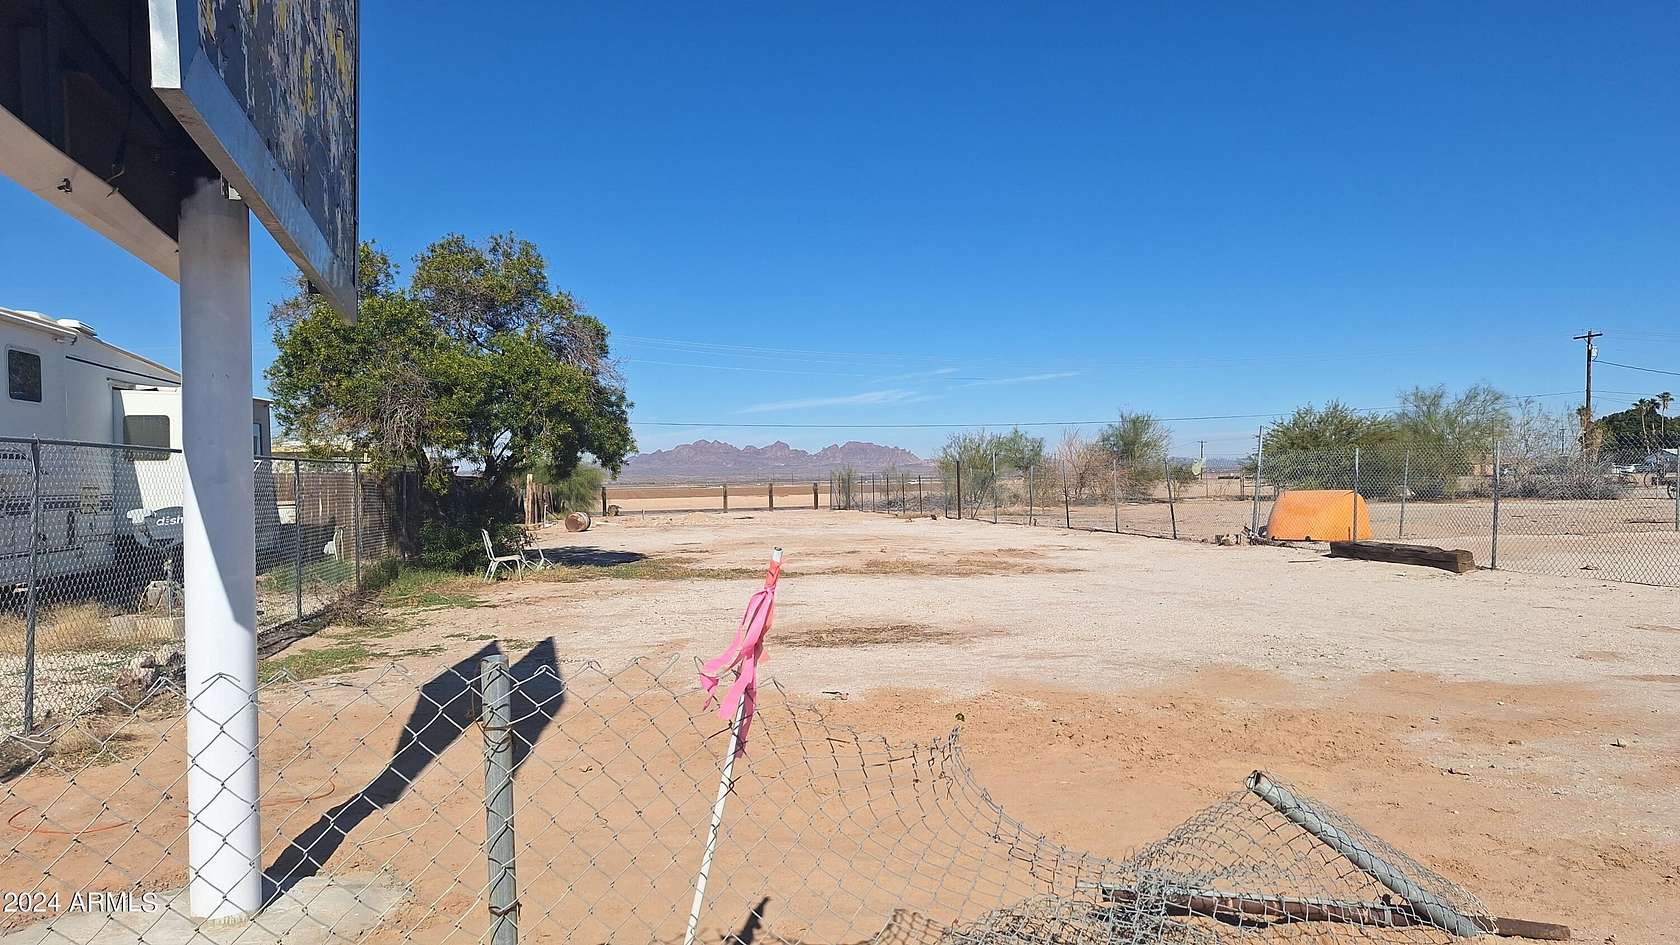 0.06 Acres of Mixed-Use Land for Sale in Wellton, Arizona